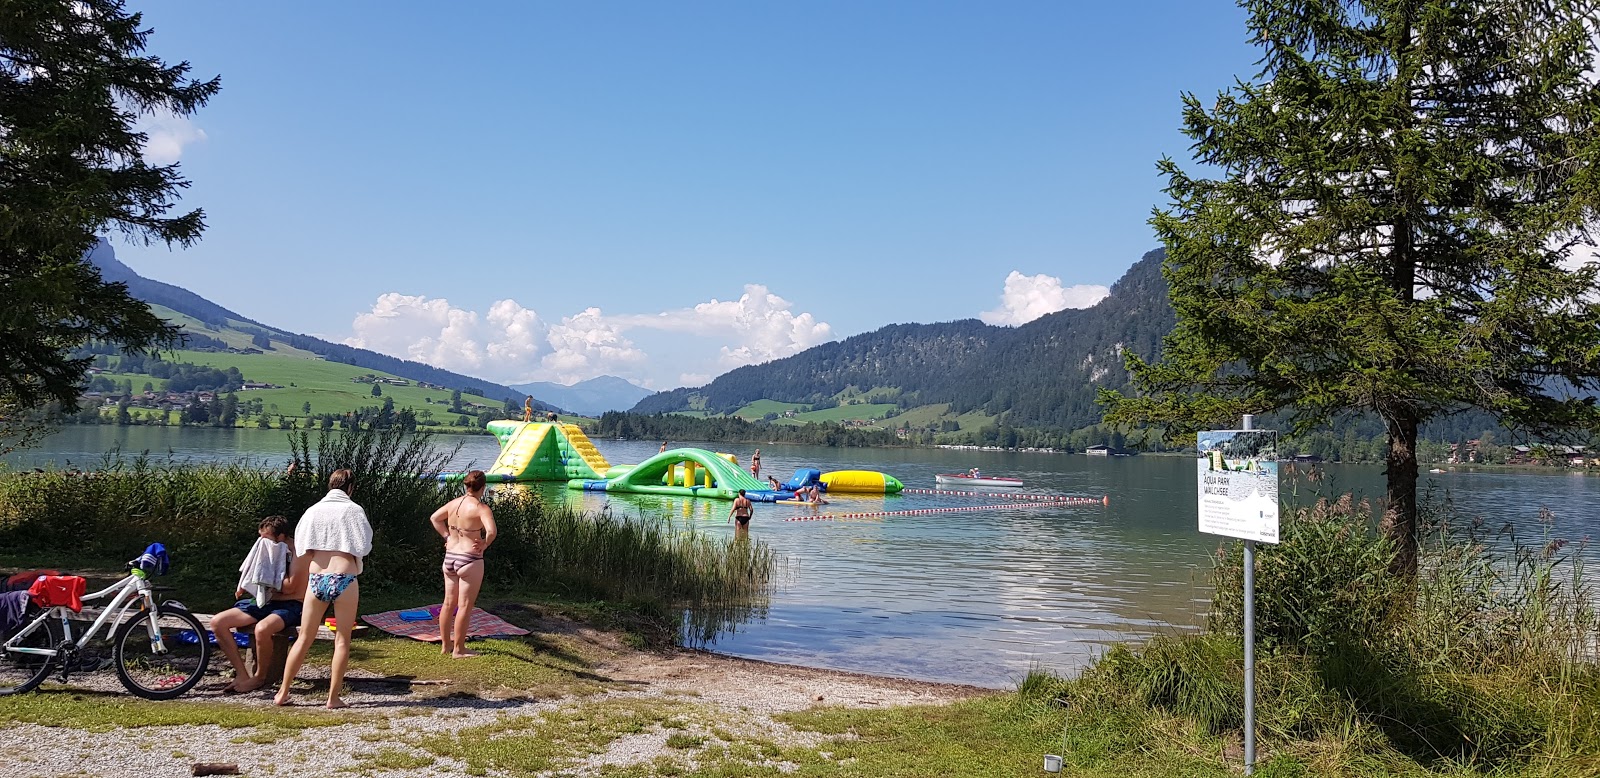 Photo of Badestrand Walchsee Ostufer with very clean level of cleanliness